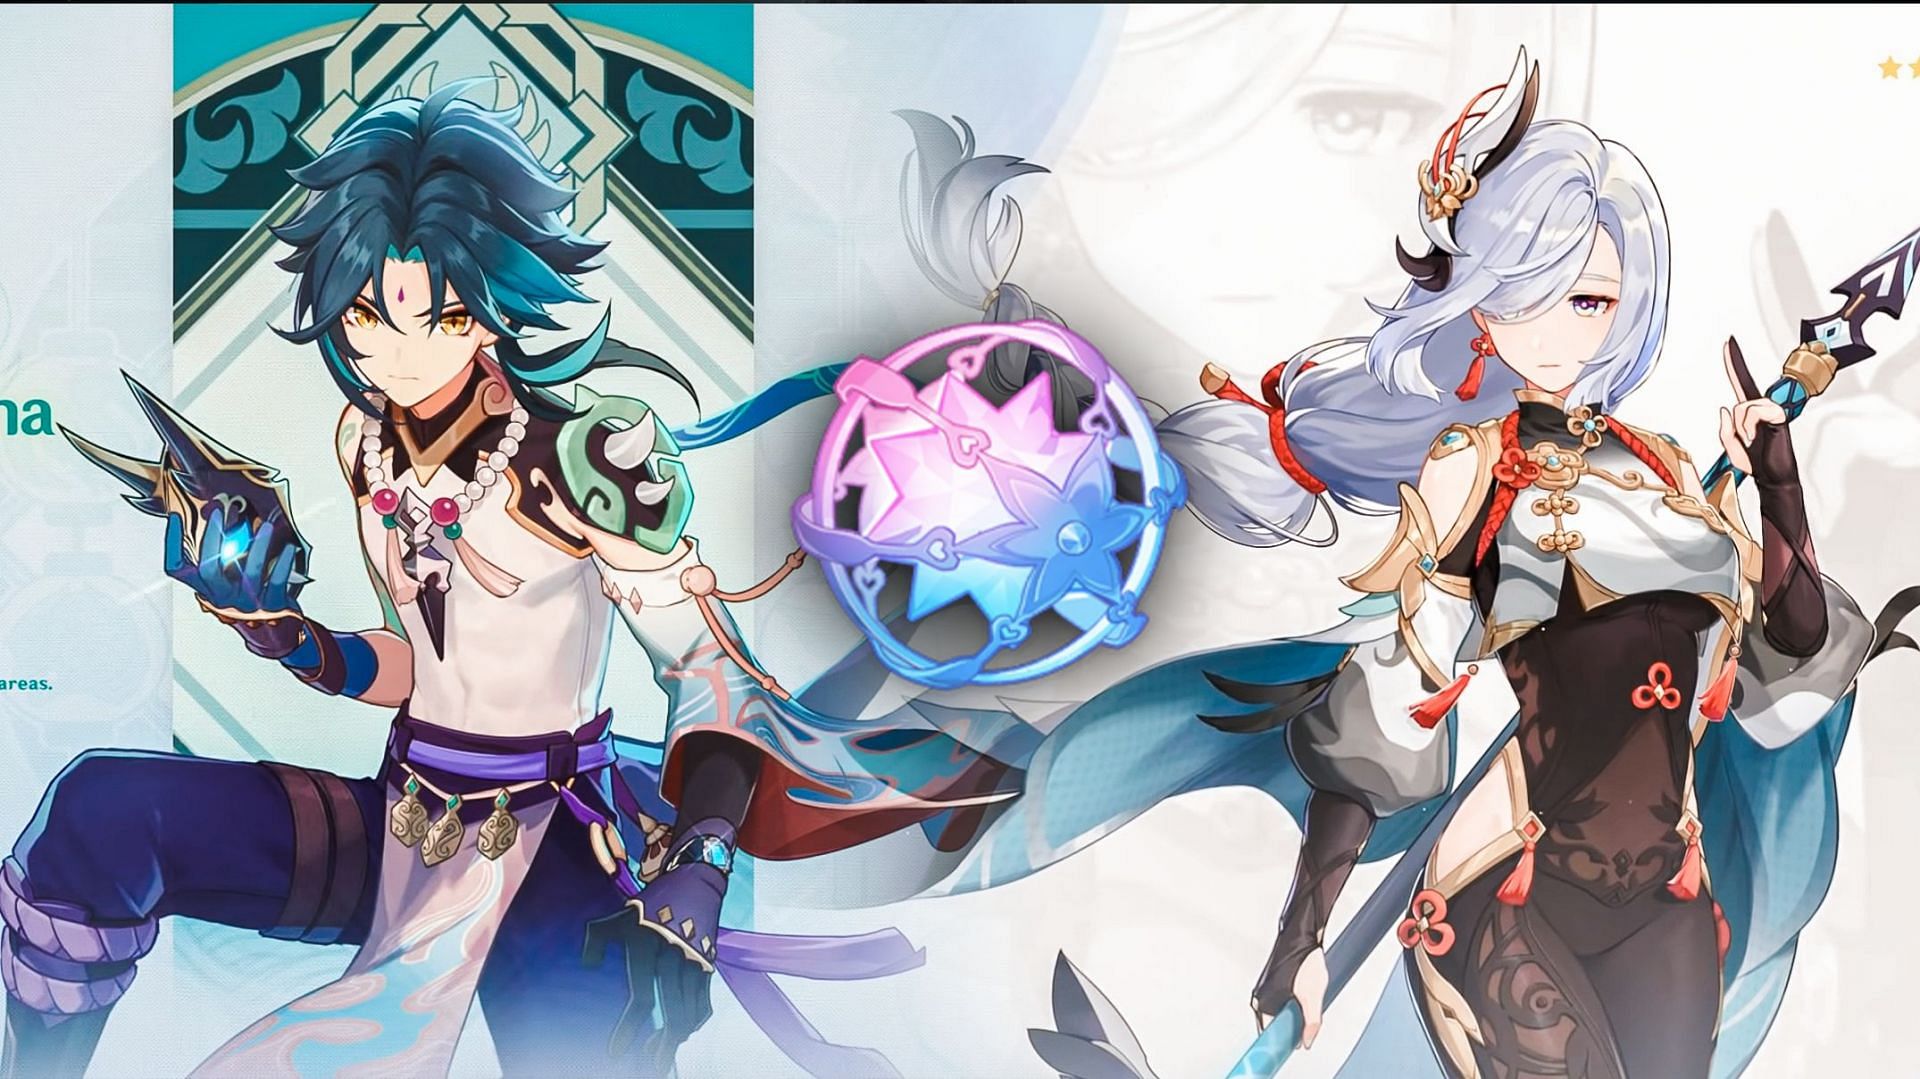 Intertwined Fates can be used on limited character banners (Image via Genshin Impact)